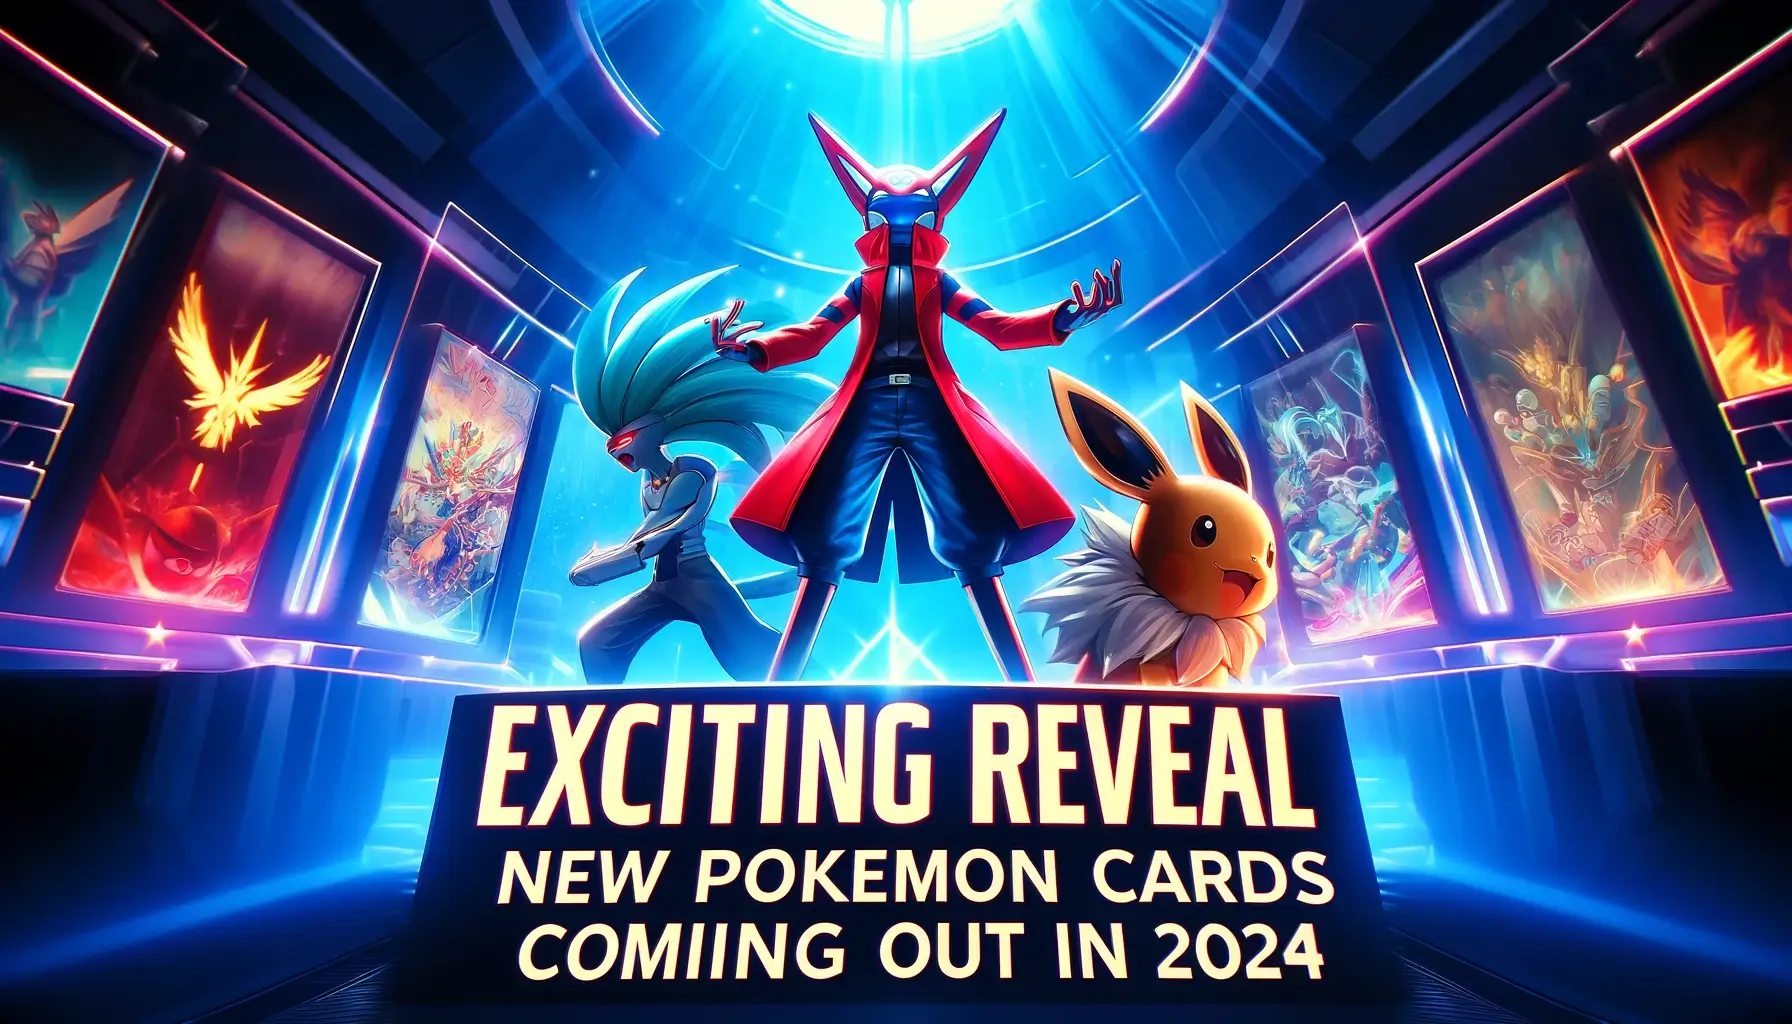 new pokemon cards coming out title image